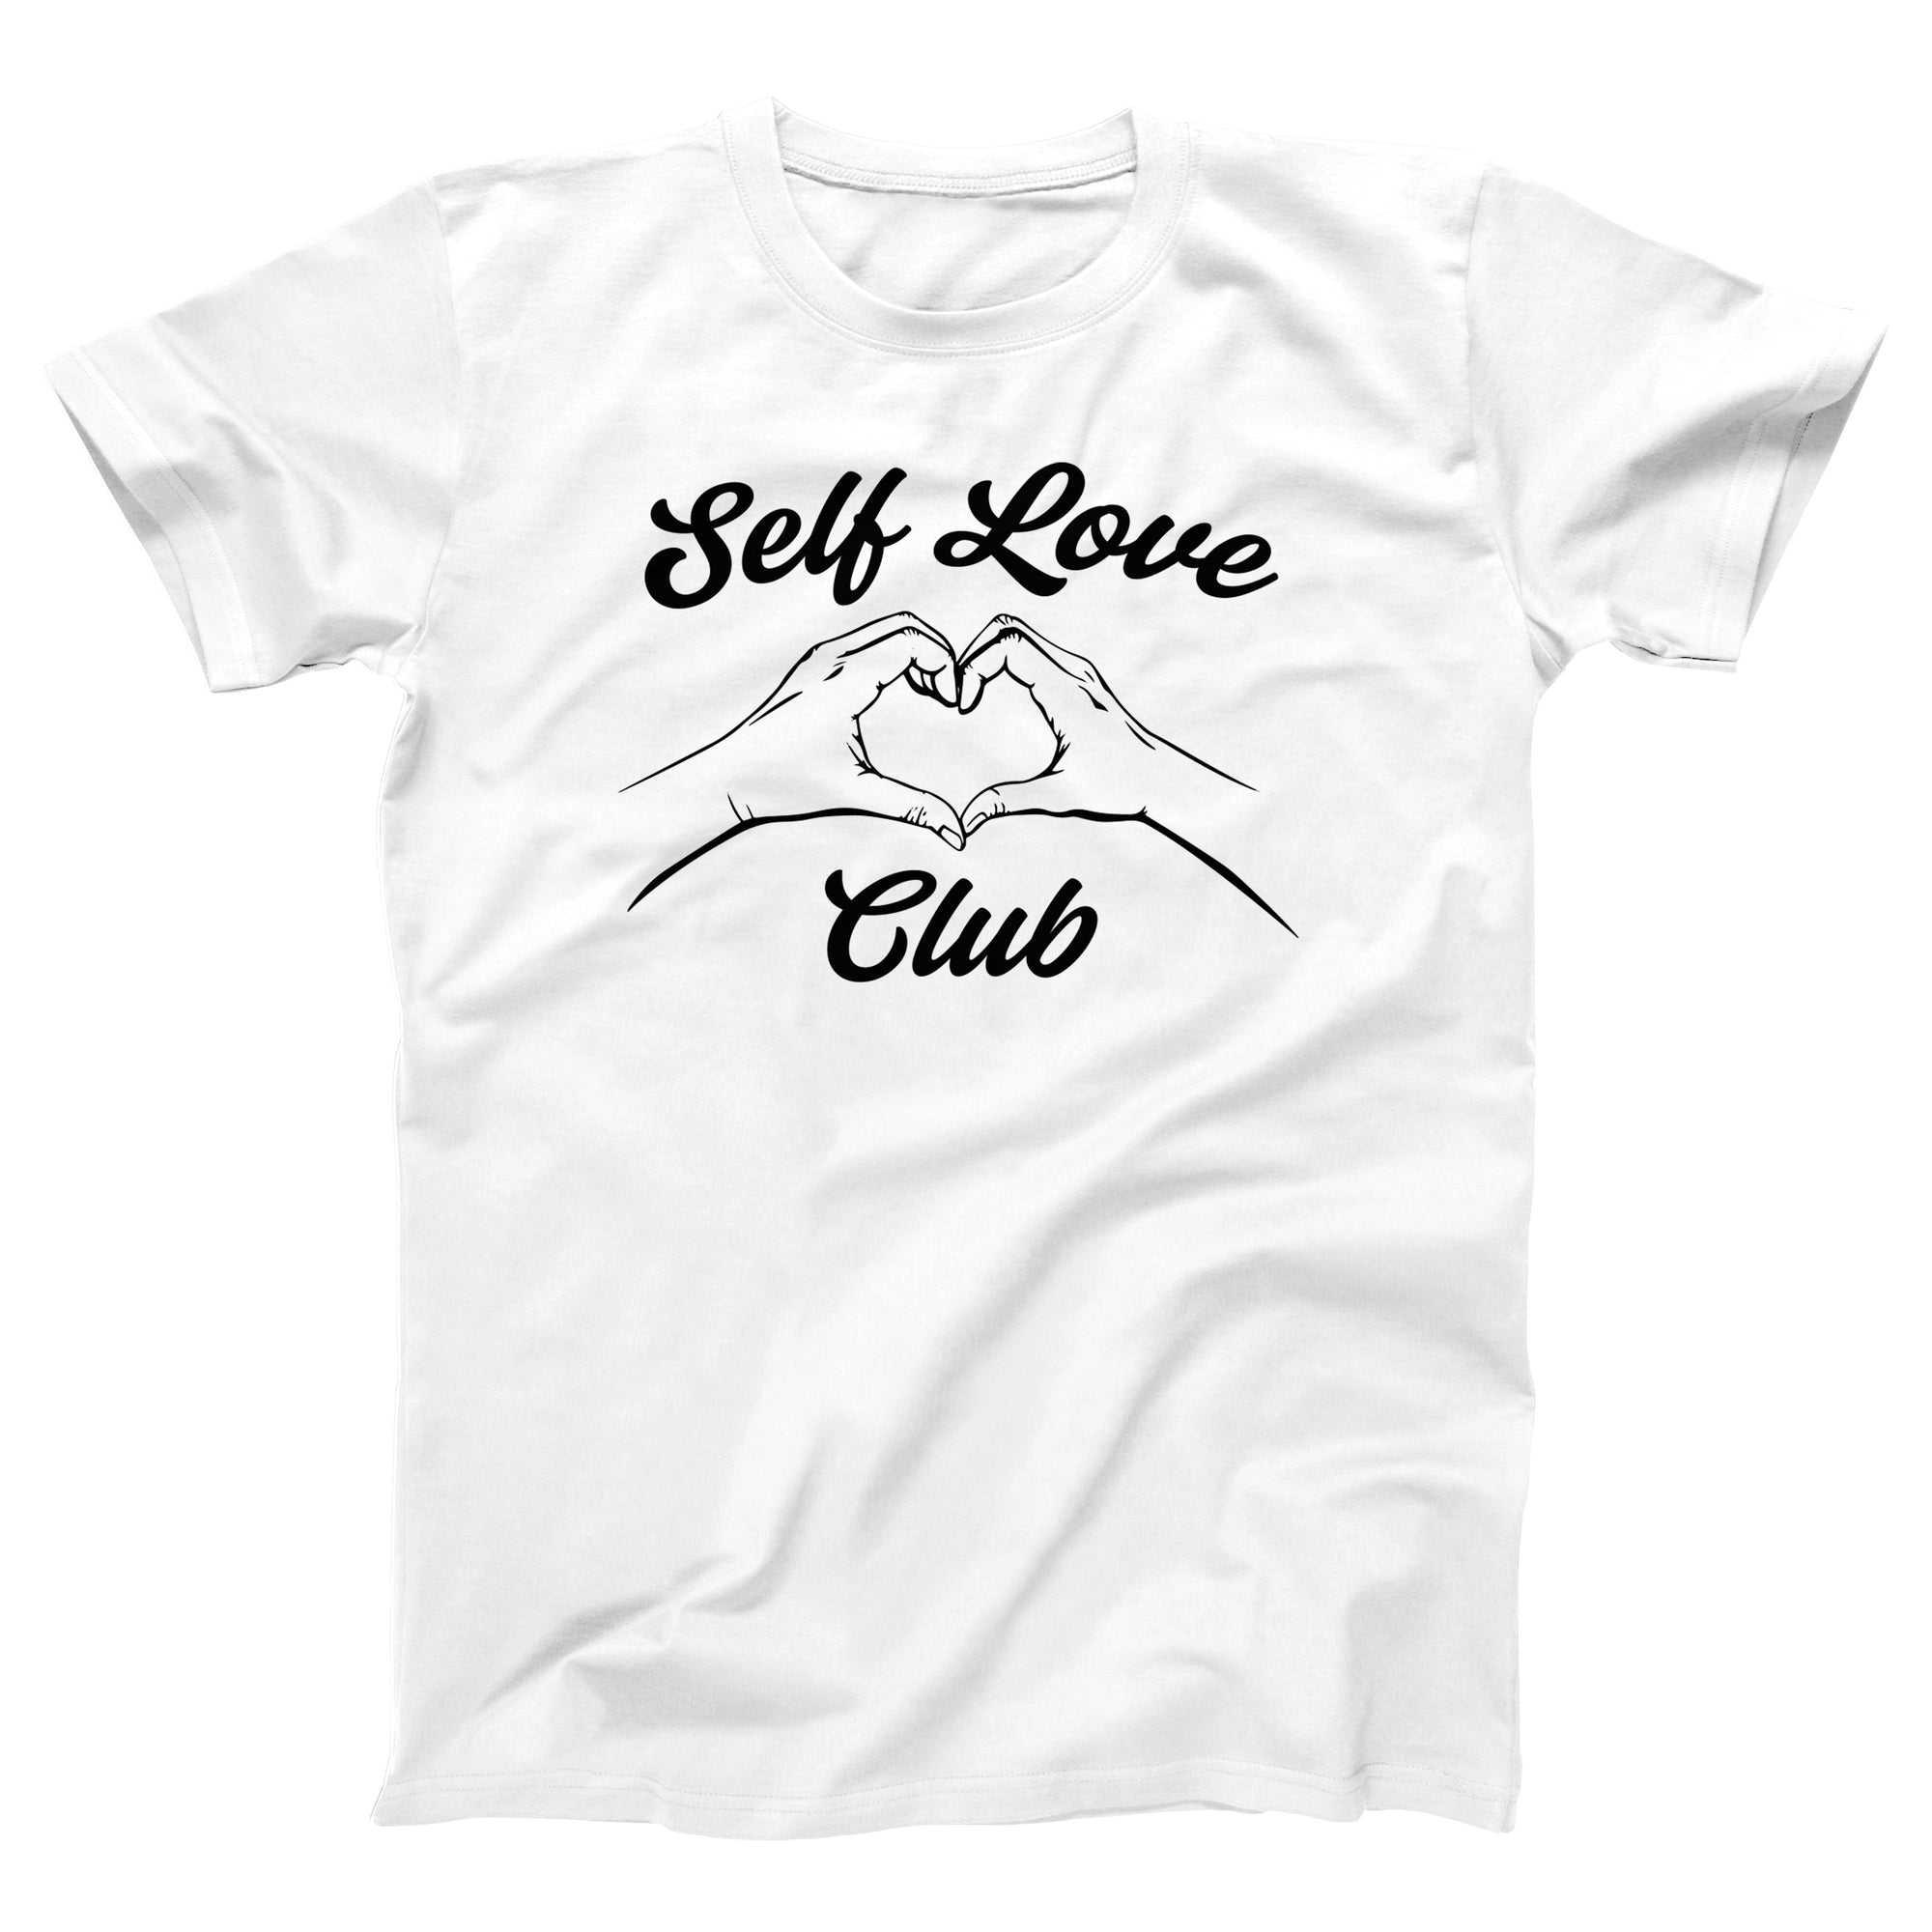 Self Love Club Adult Unisex T-Shirt | Funny and Sarcastic T-Shirts & Apparel